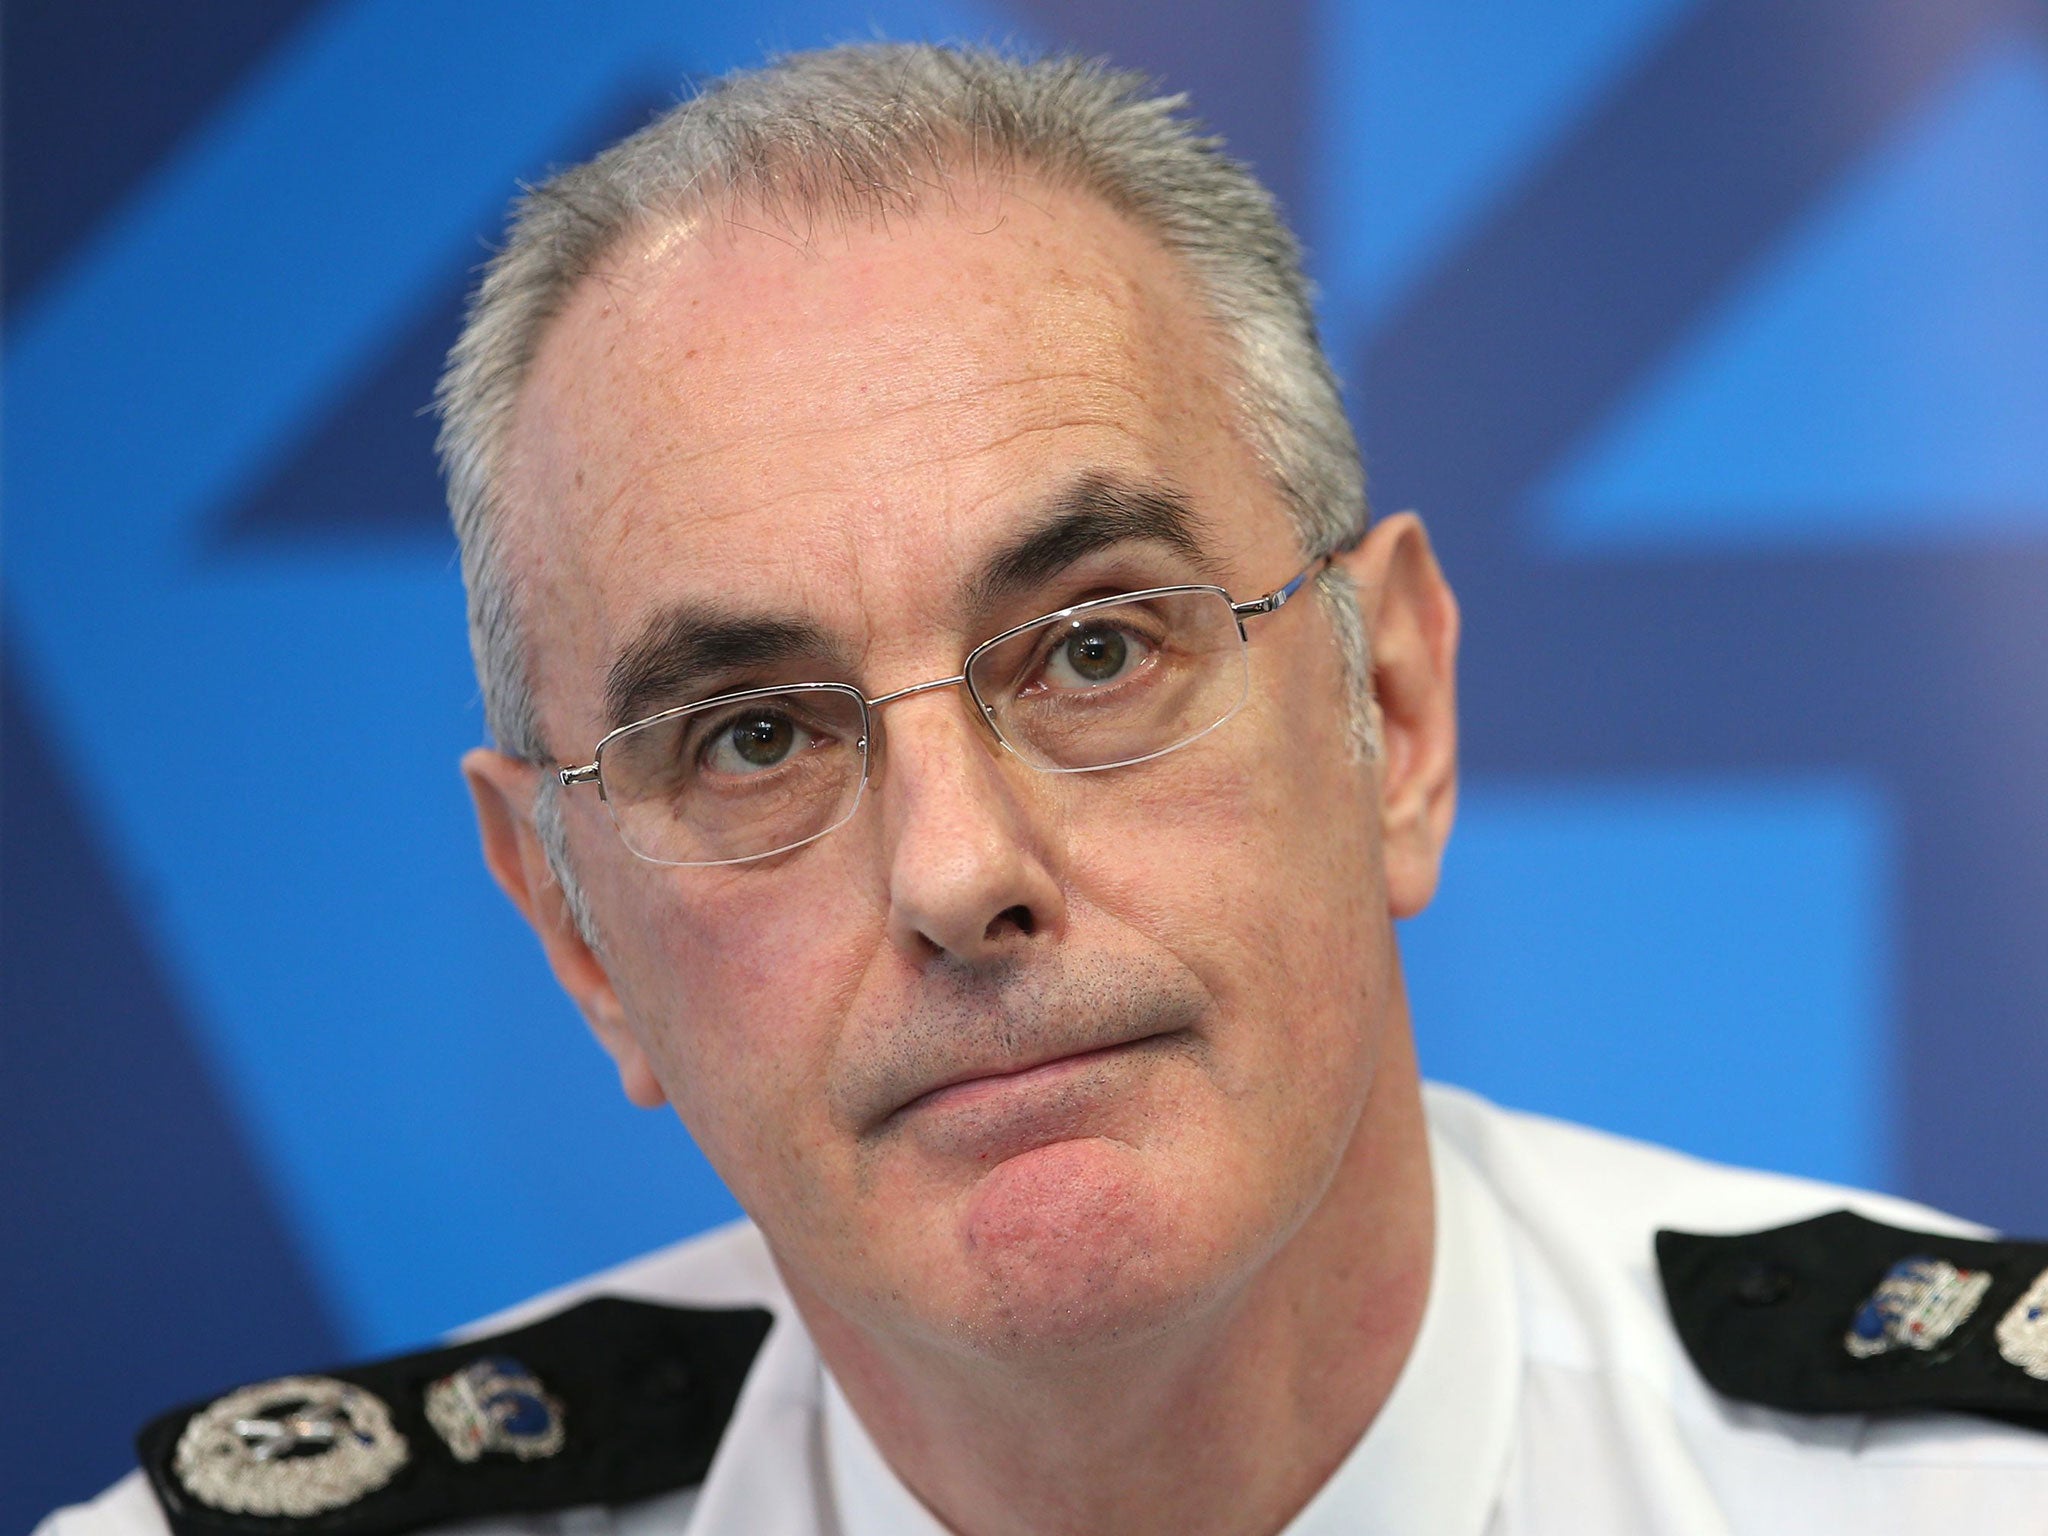 Former Police Scotland chief who resigned amid bullying investigation given watchdog role